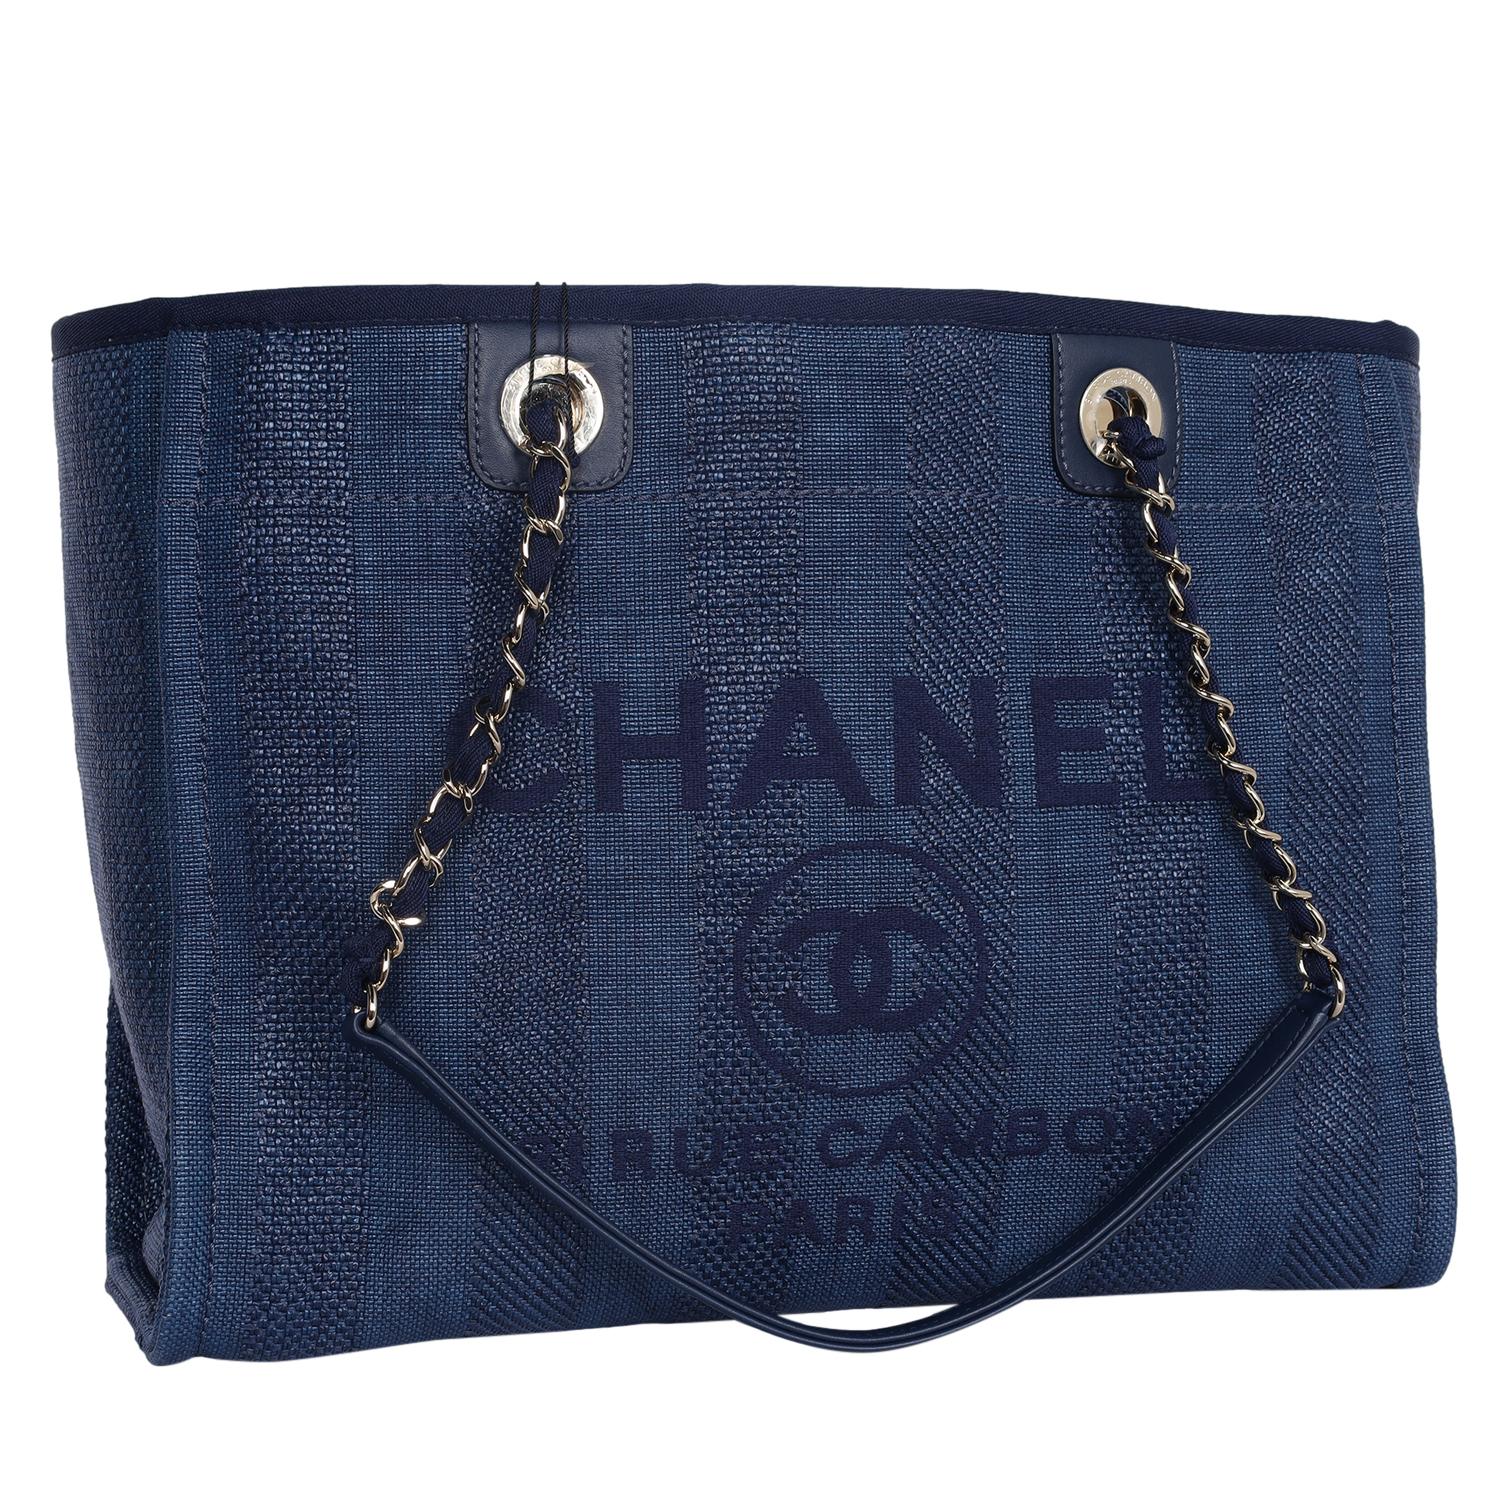 Chanel Blue Striped Mixed Fibers Medium Deauville Shoulder Bag Tote Navy 2019 In New Condition For Sale In Salt Lake Cty, UT